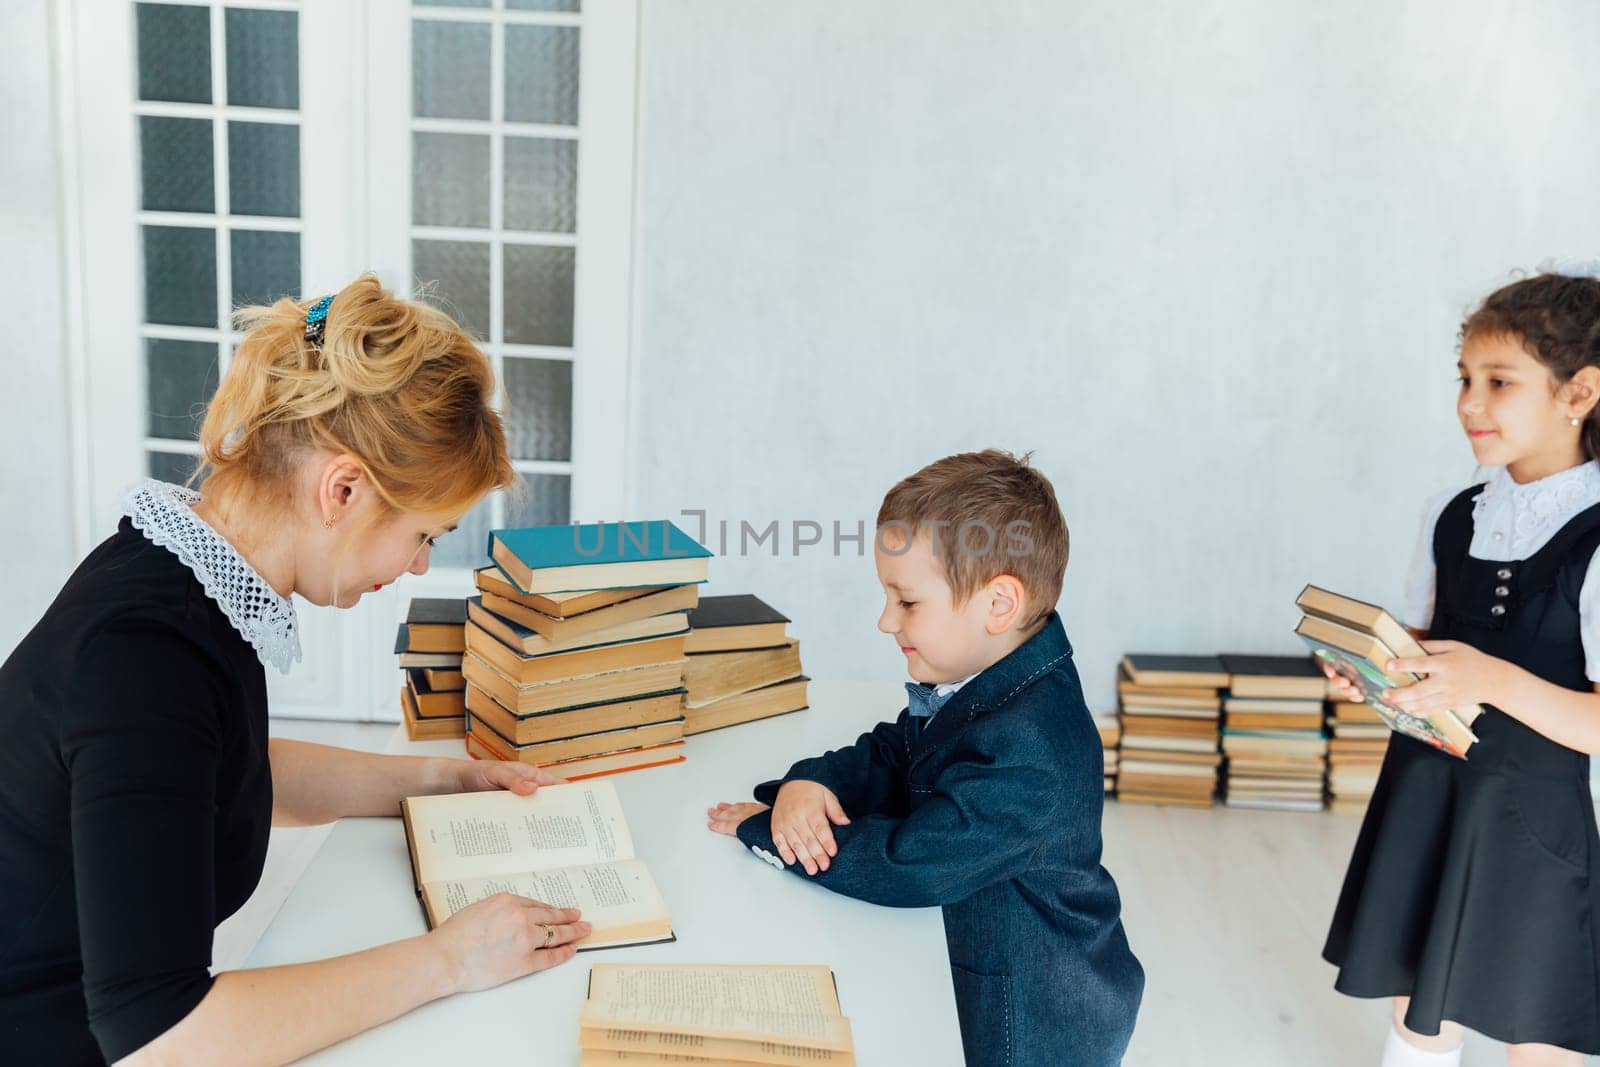 Teacher at lesson on teaching children in school classroom by Simakov